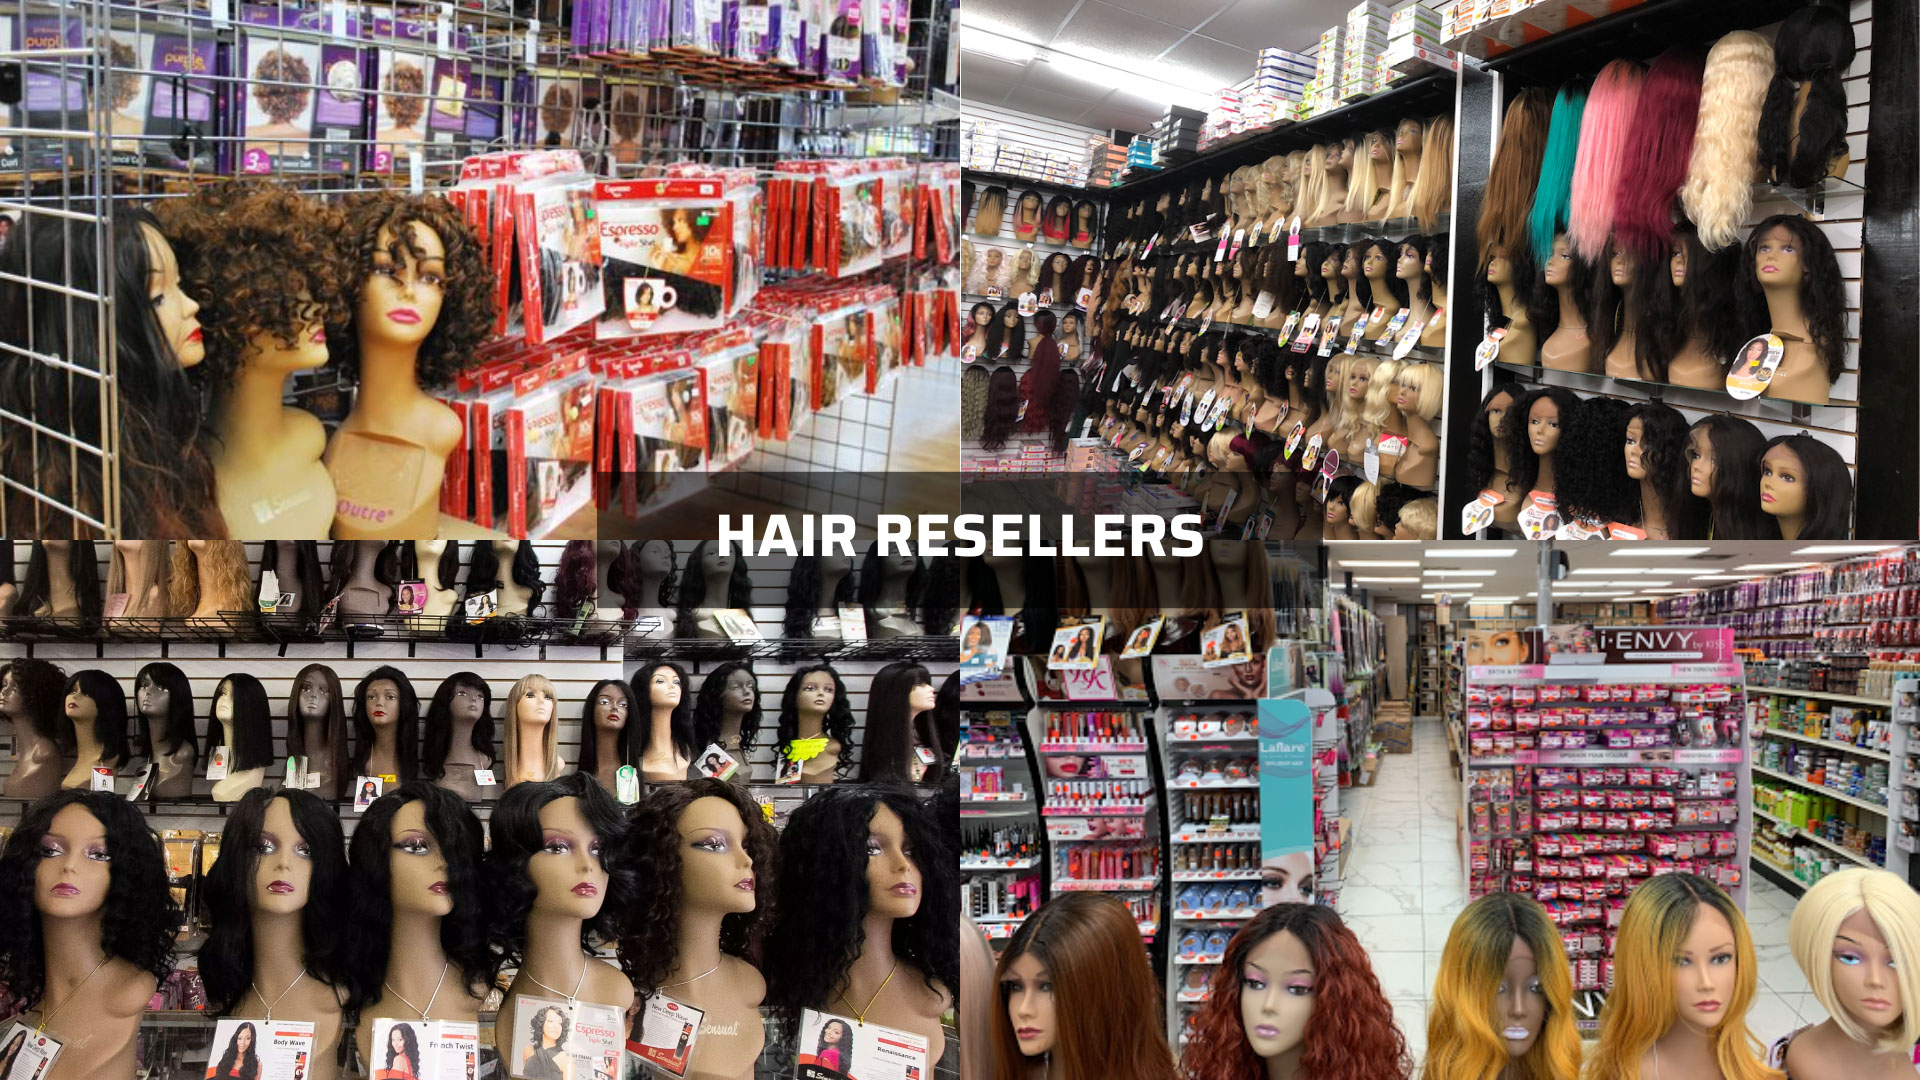 Resell wholesale hair vendor. Did you know who they are?